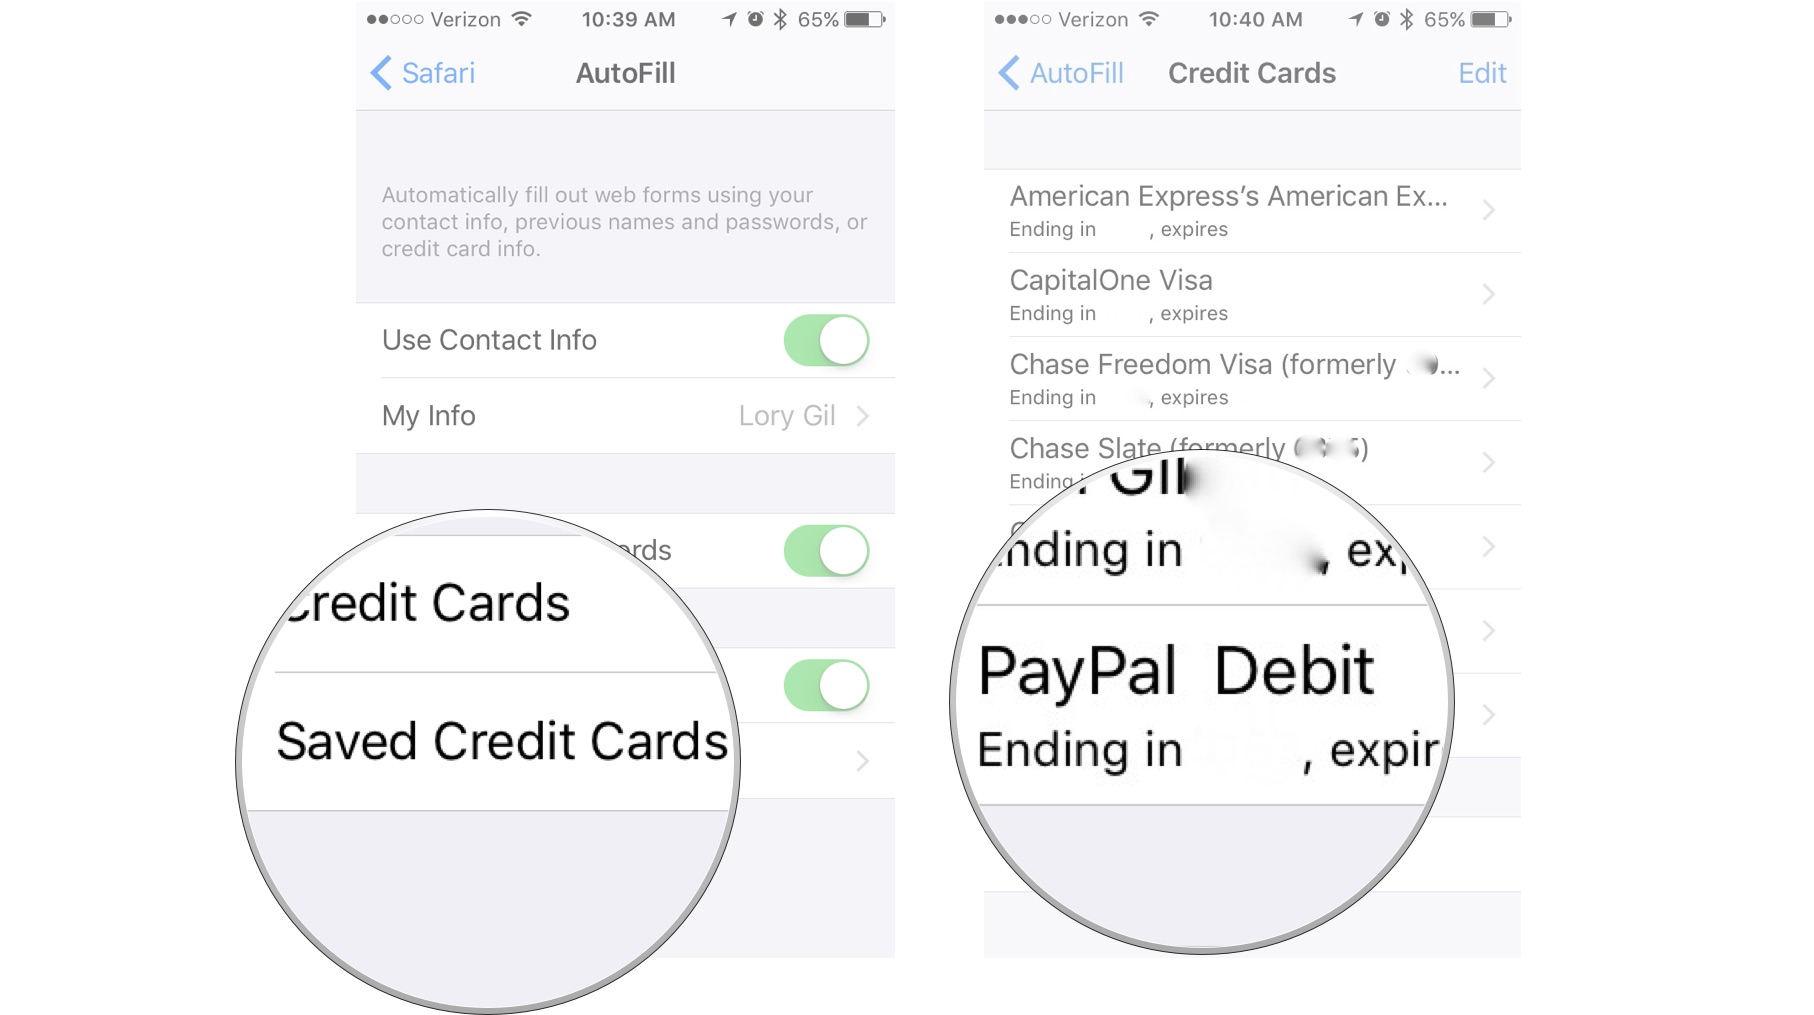 Tap Saved Credit Cards, then tap a credit card